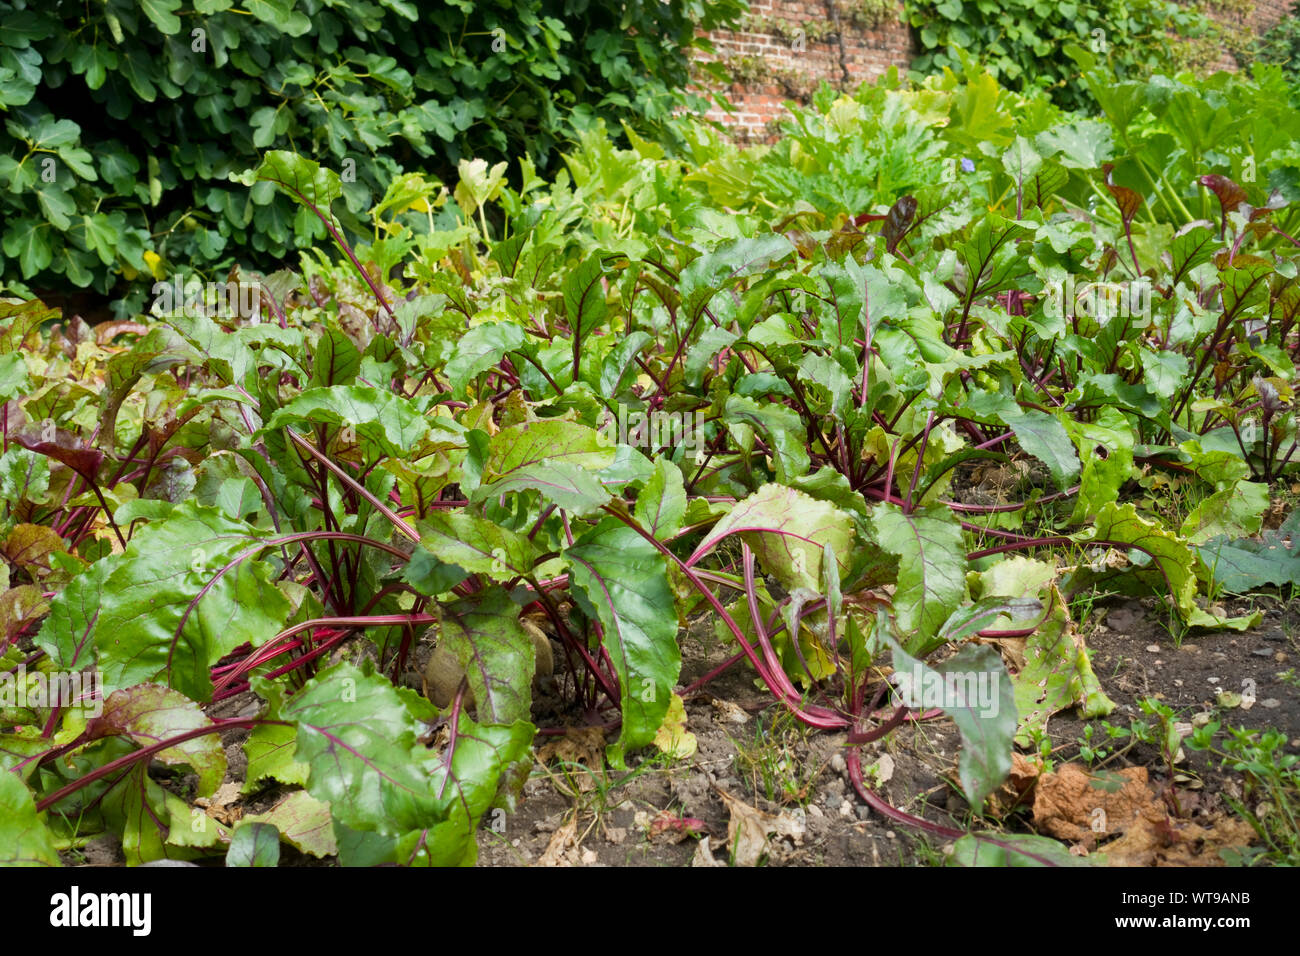 Beetroot Boltardy (beta vulgaris) vegetable plant plants growing on an allotment in summer England UK United Kingdom GB Great Britain Stock Photo